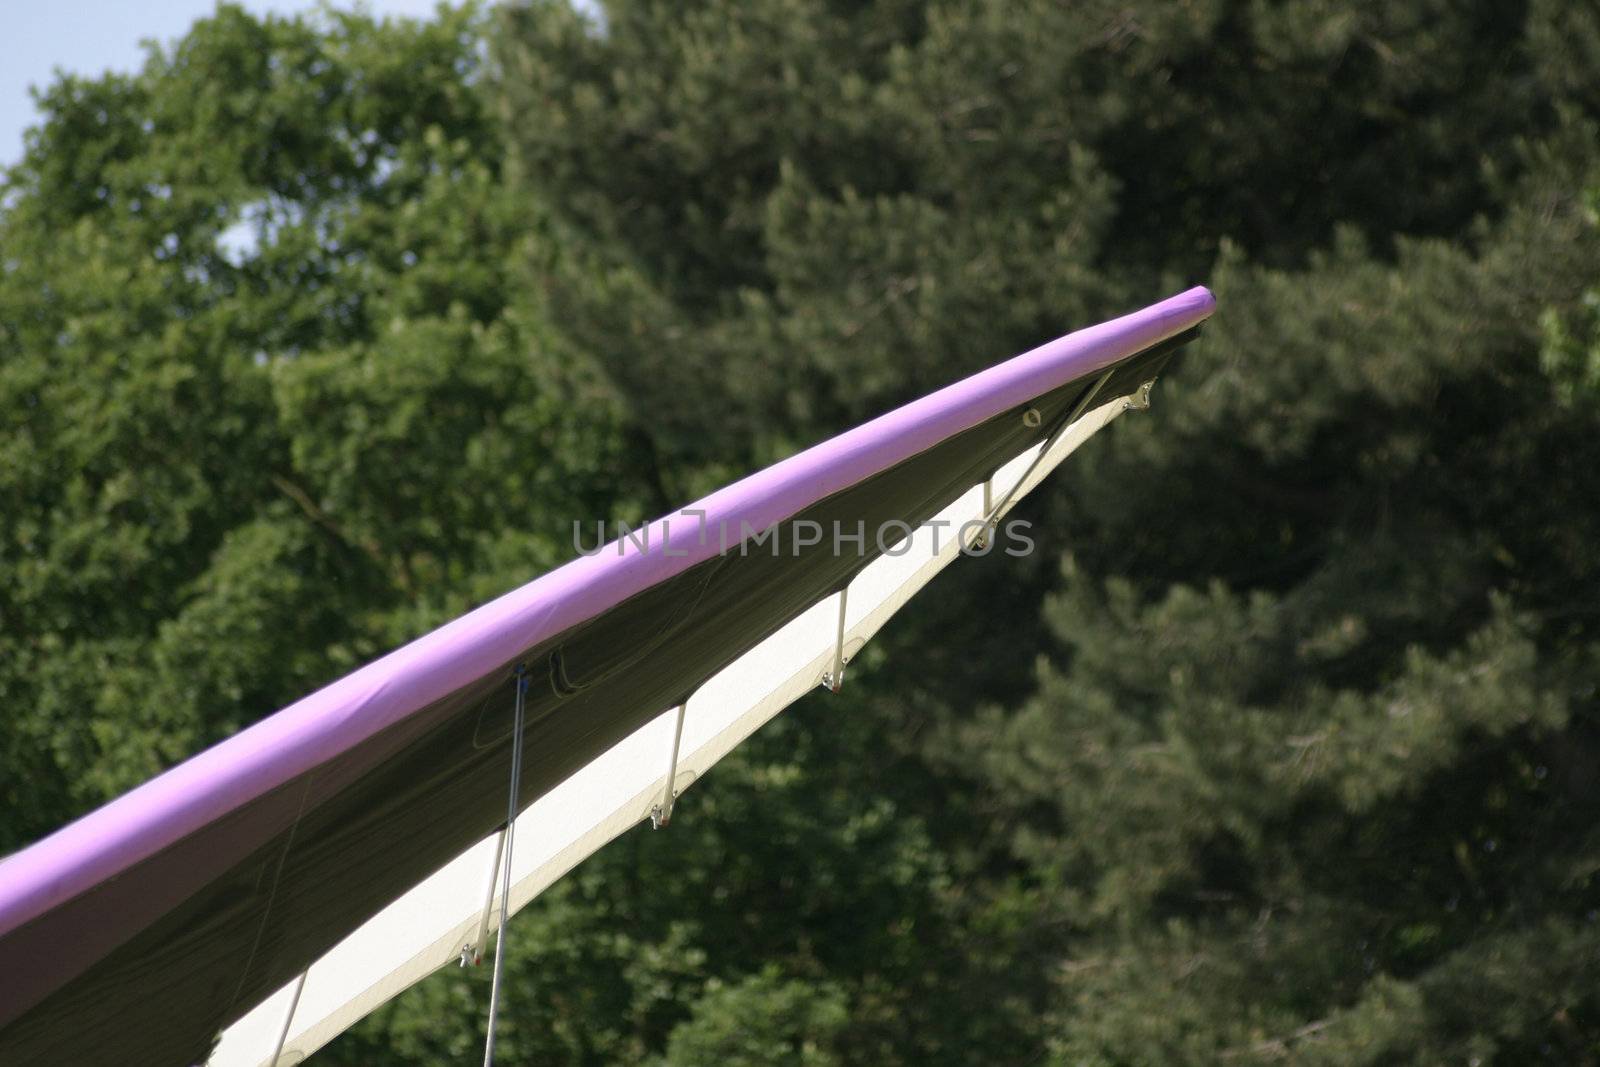 details of the tip of a hang glider